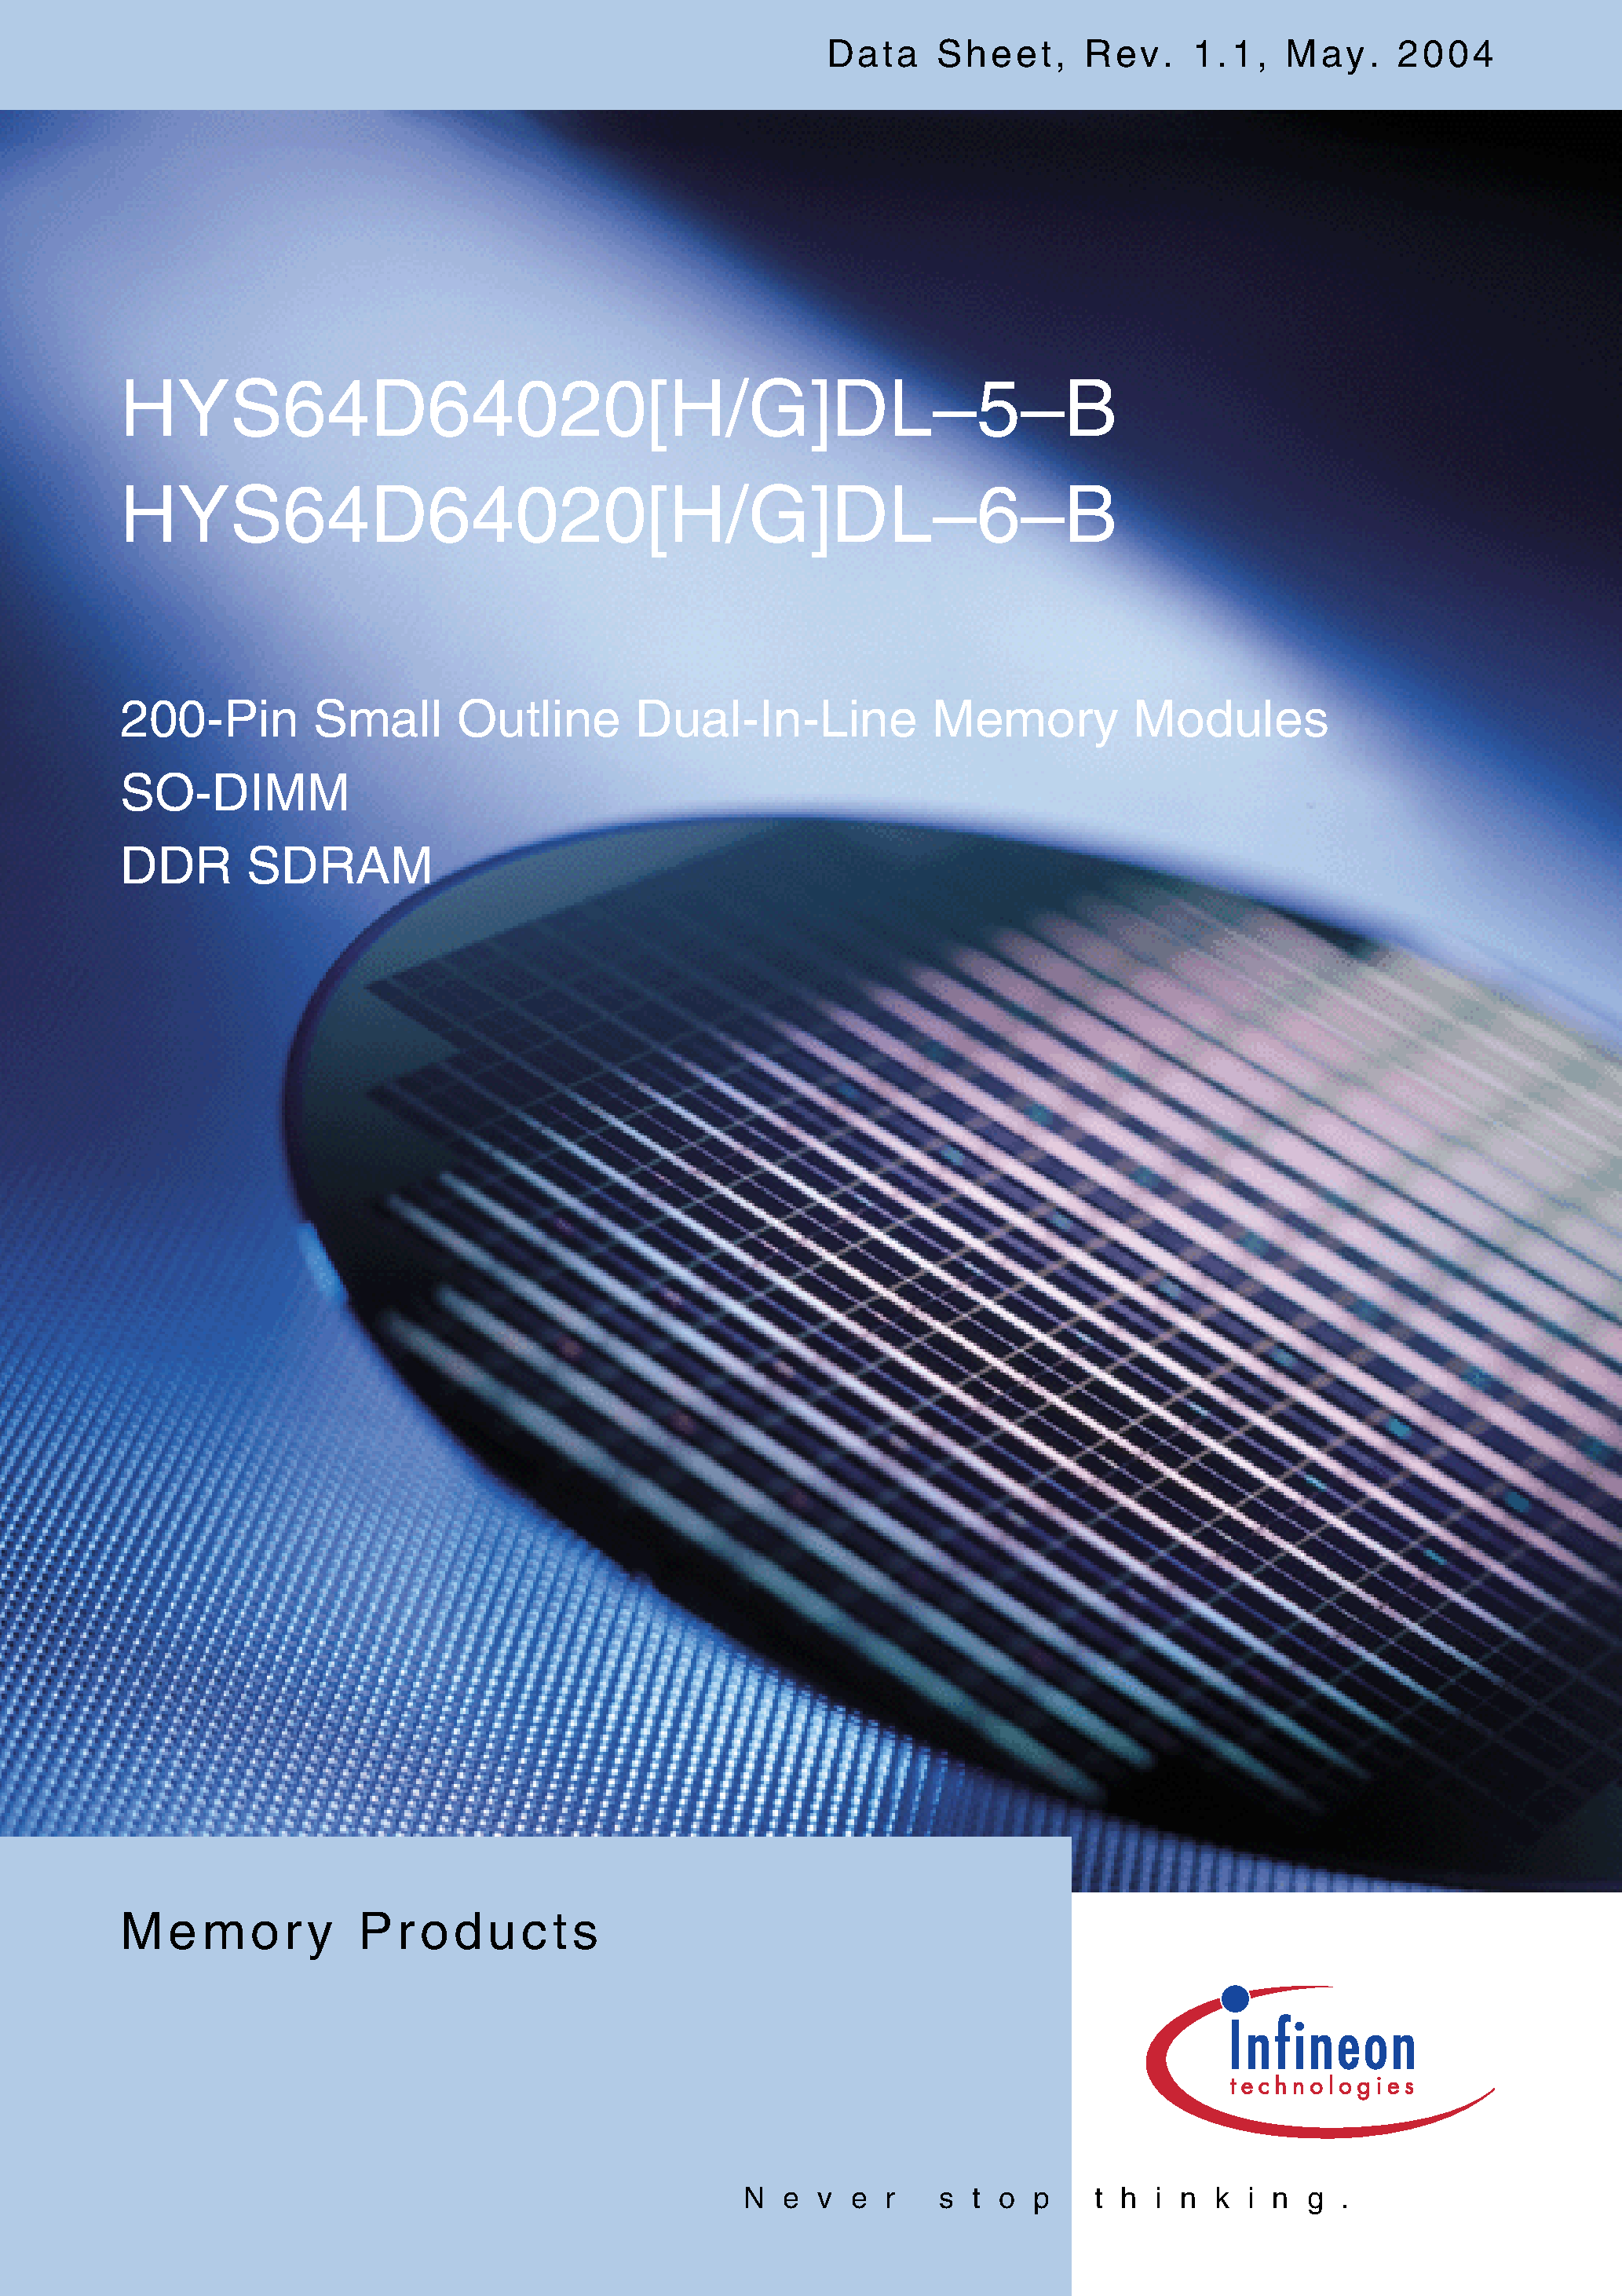 Datasheet HYS64D64020HDL-6-B - 200-Pin Small Outline Dual-In-Line Memory Modules page 1